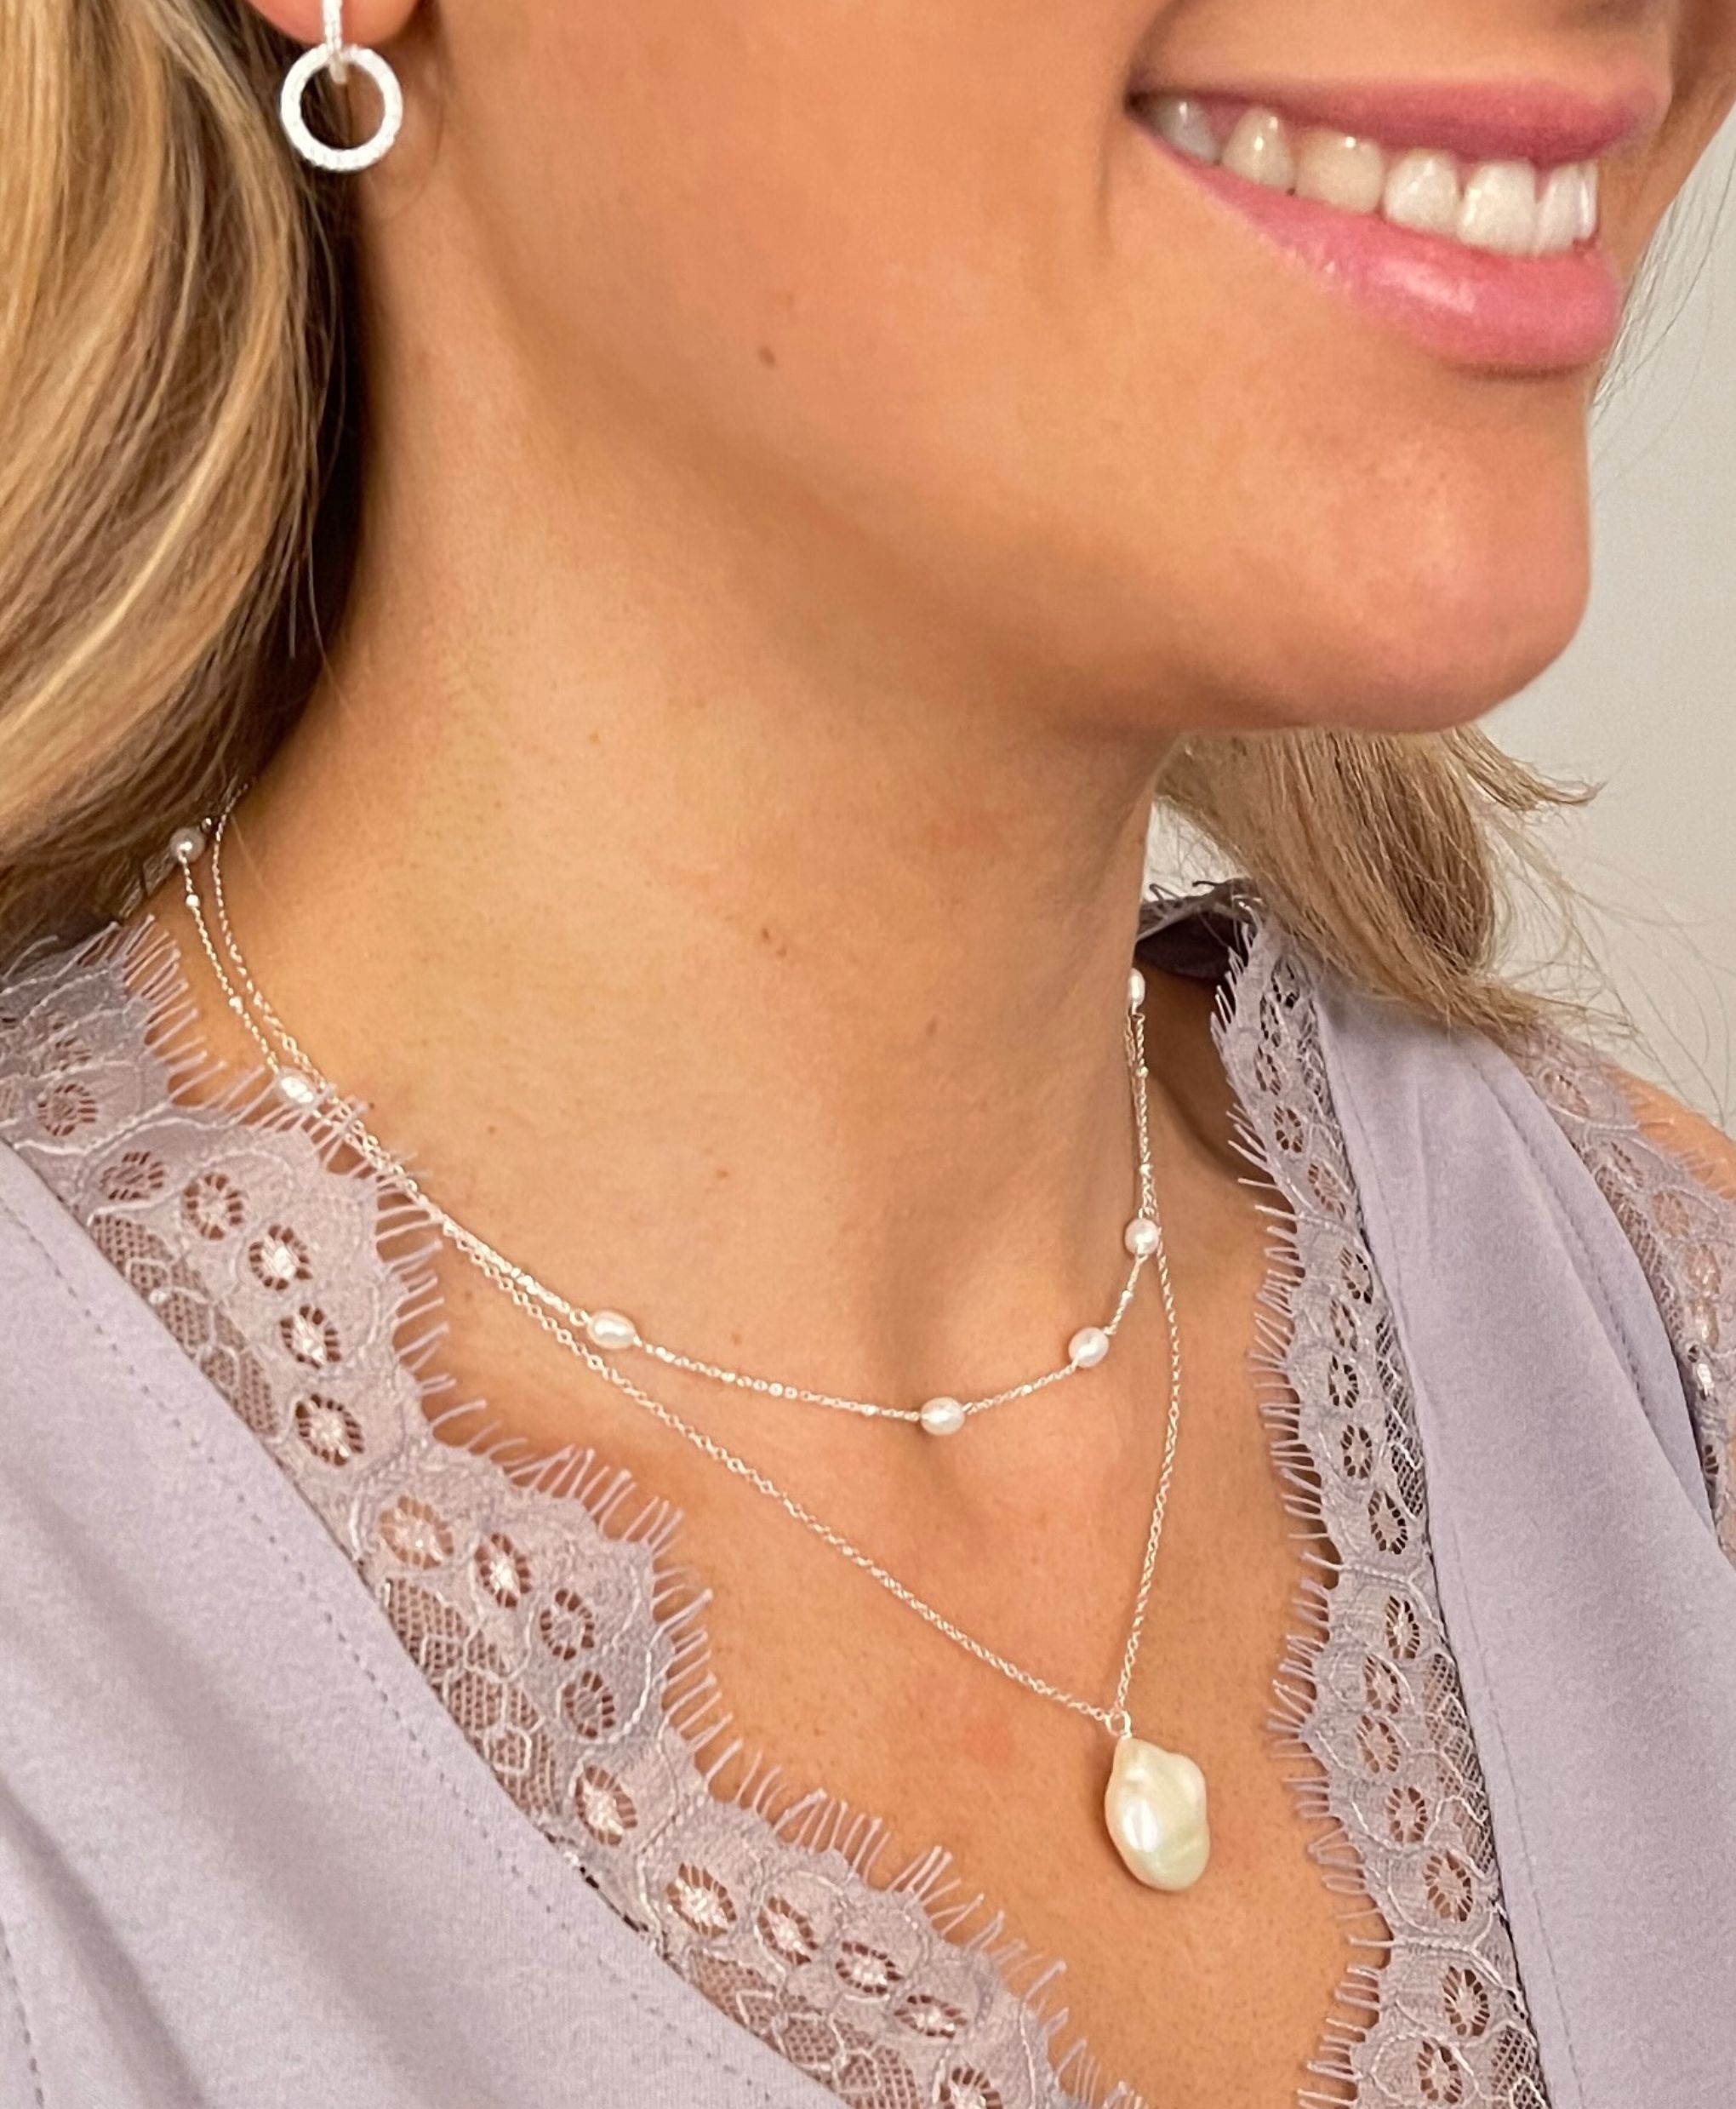 The Necklace Layering Hack That Gives You The Perfect Jewelry Stack Every  Time